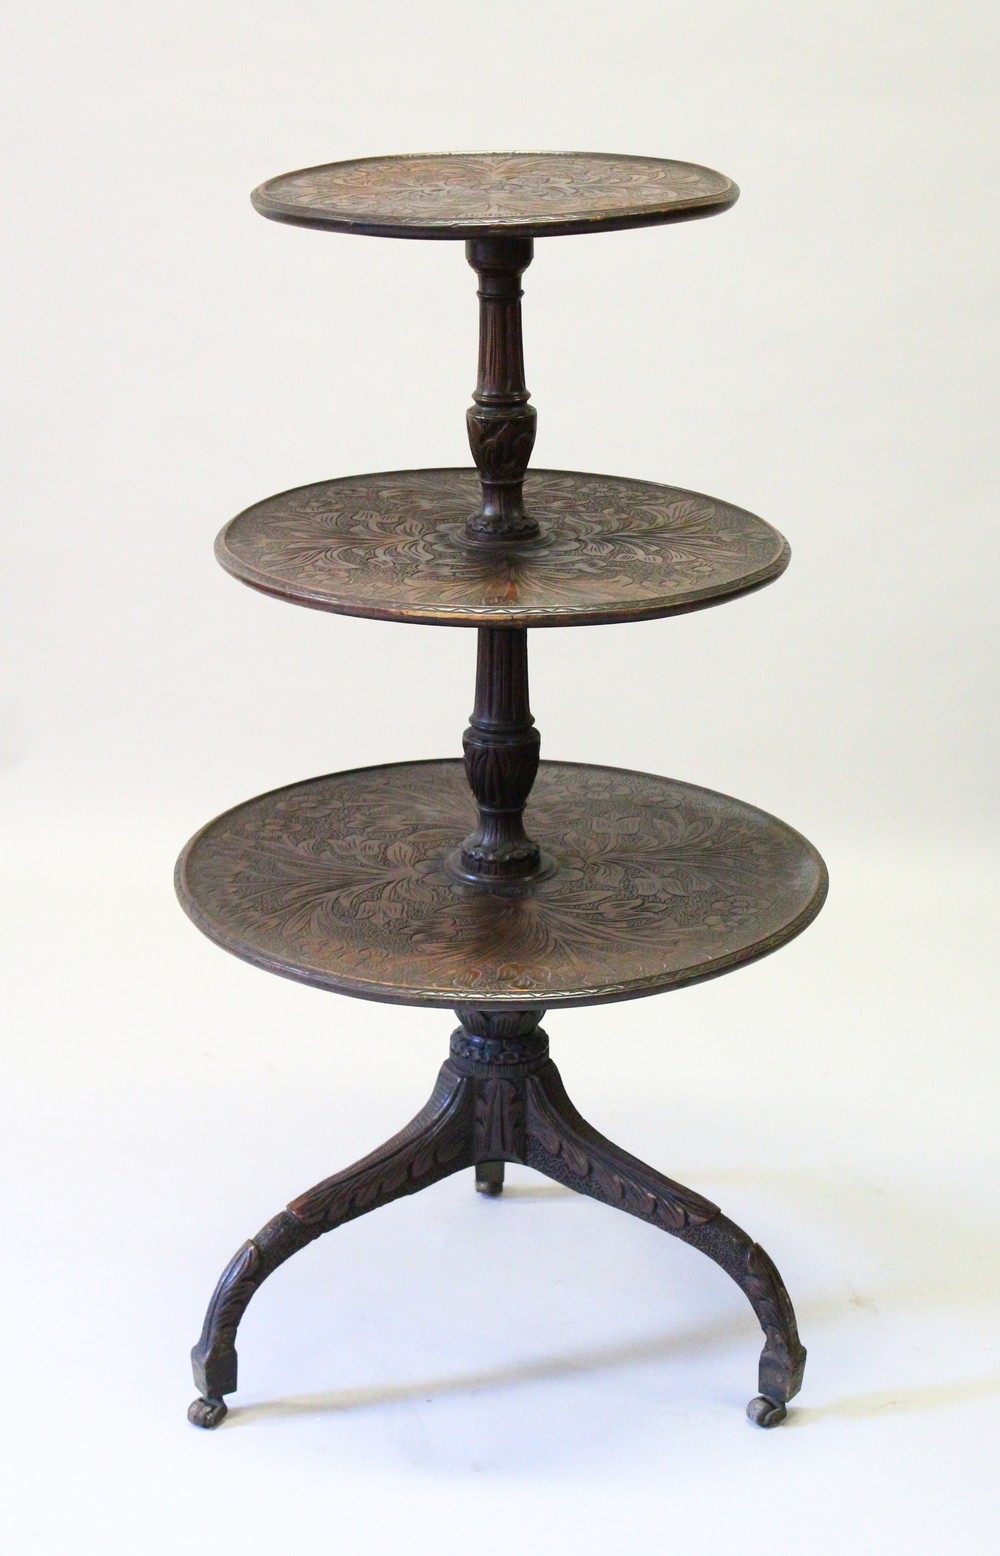 A GEORGE III MAHOGANY CARVED THREE TIER DUMB WAITER with centre column support ending in tripod